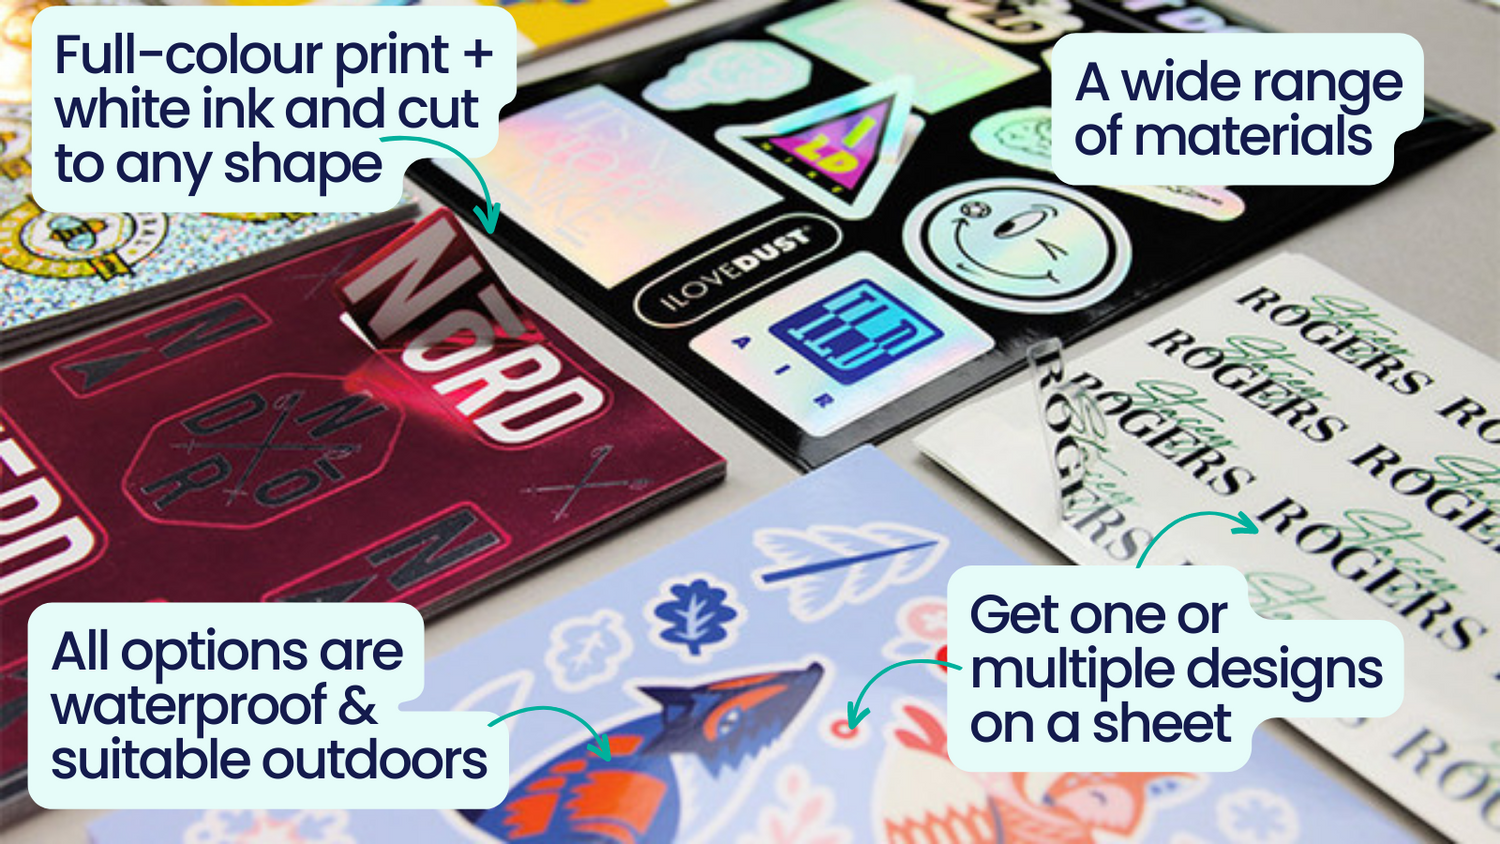 What are die-cut labels